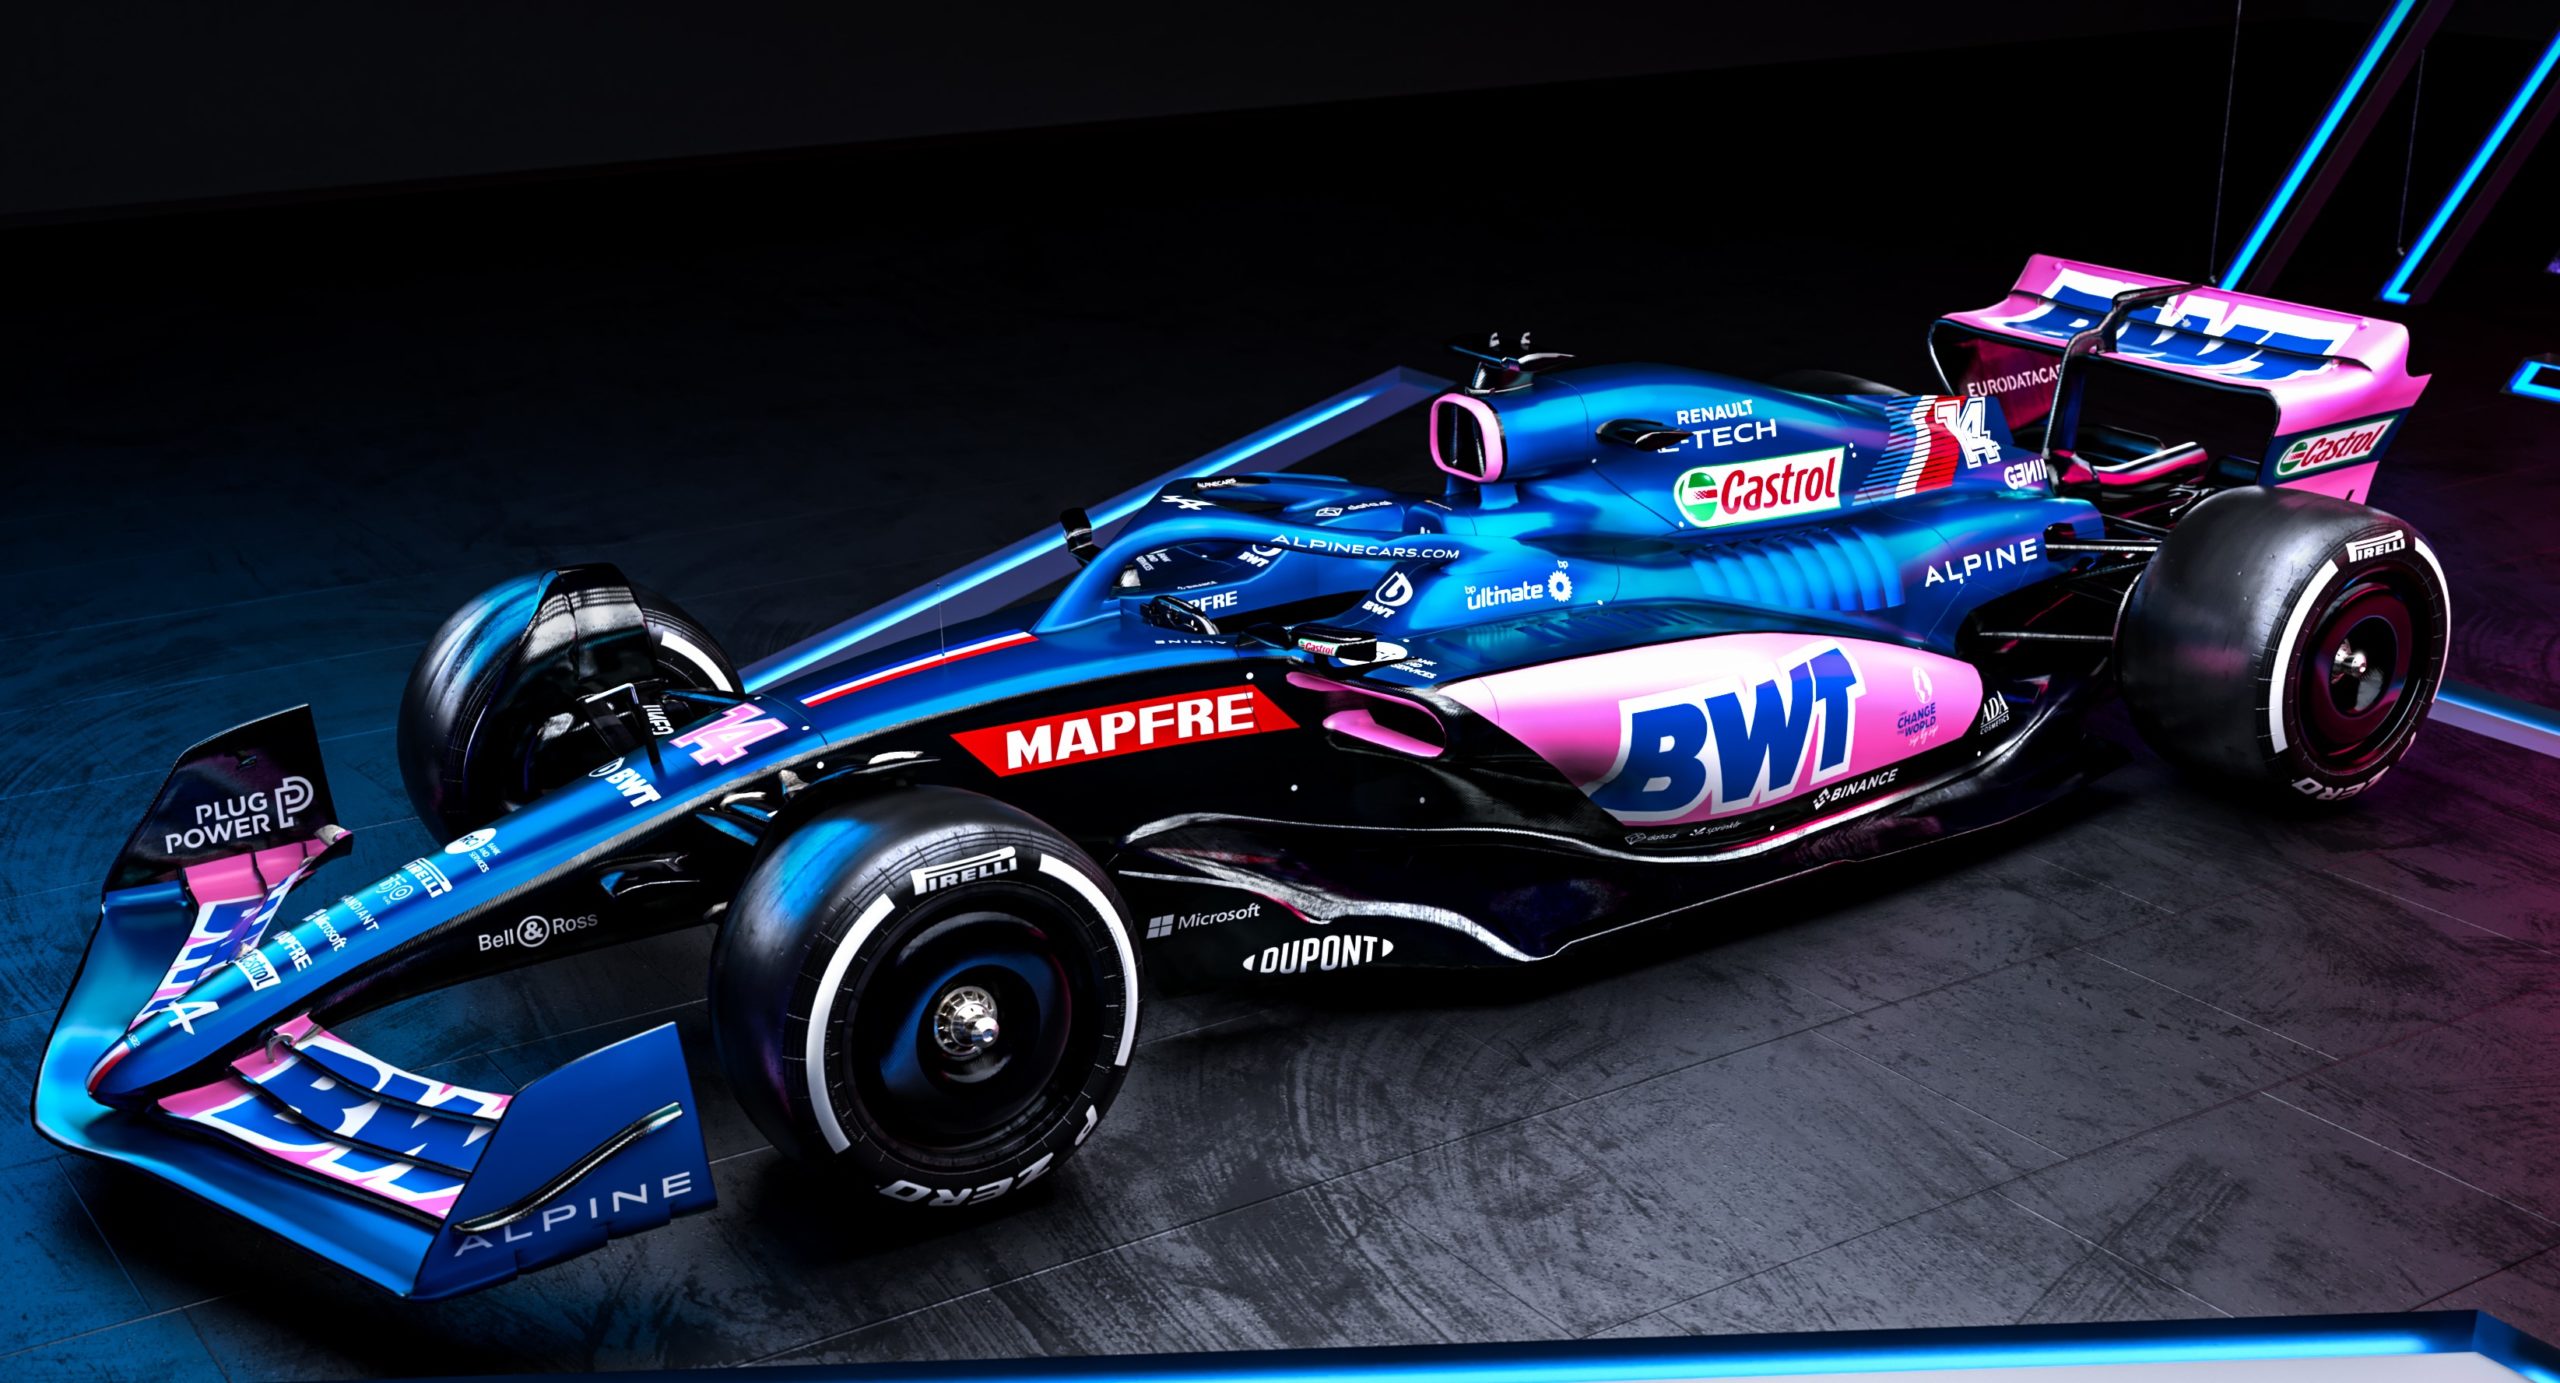 Alpine reveal their 2022 contender, the A522 as pink sponsor BWT features in the livery